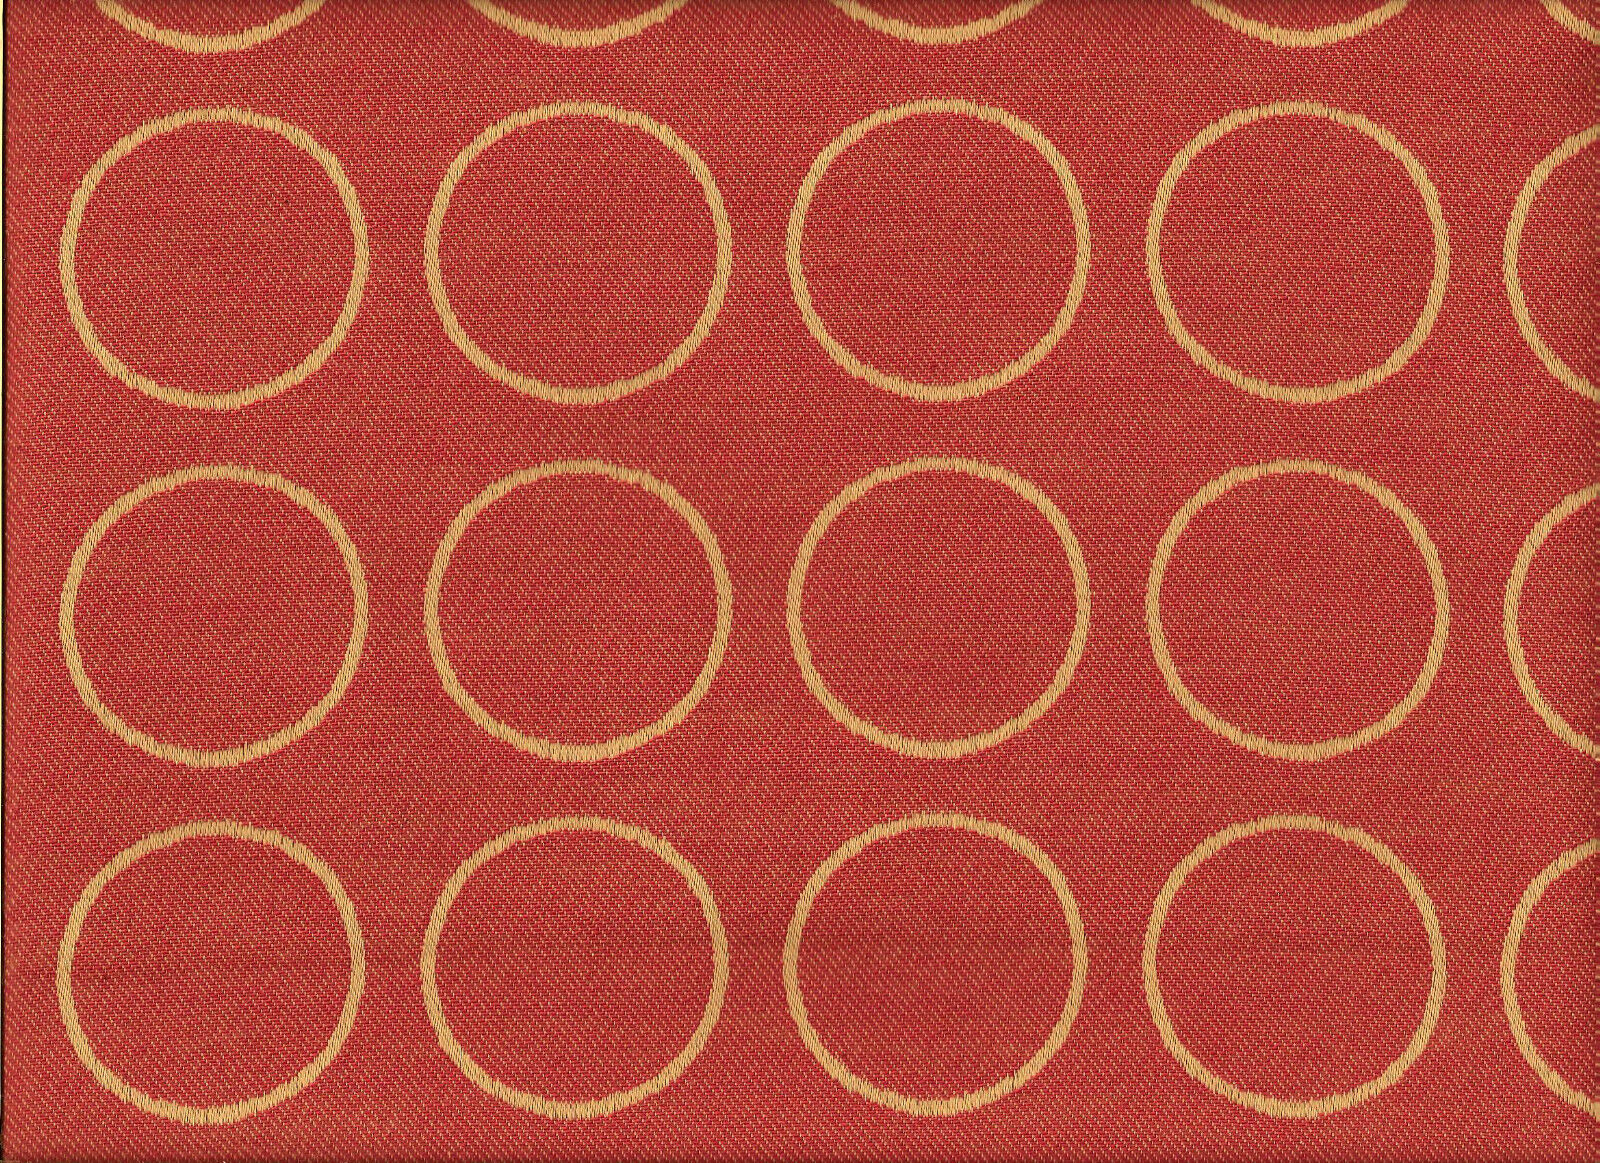 Woven Modern Contemporary Geometric Shapes Circles Pink Upholstery Fabric